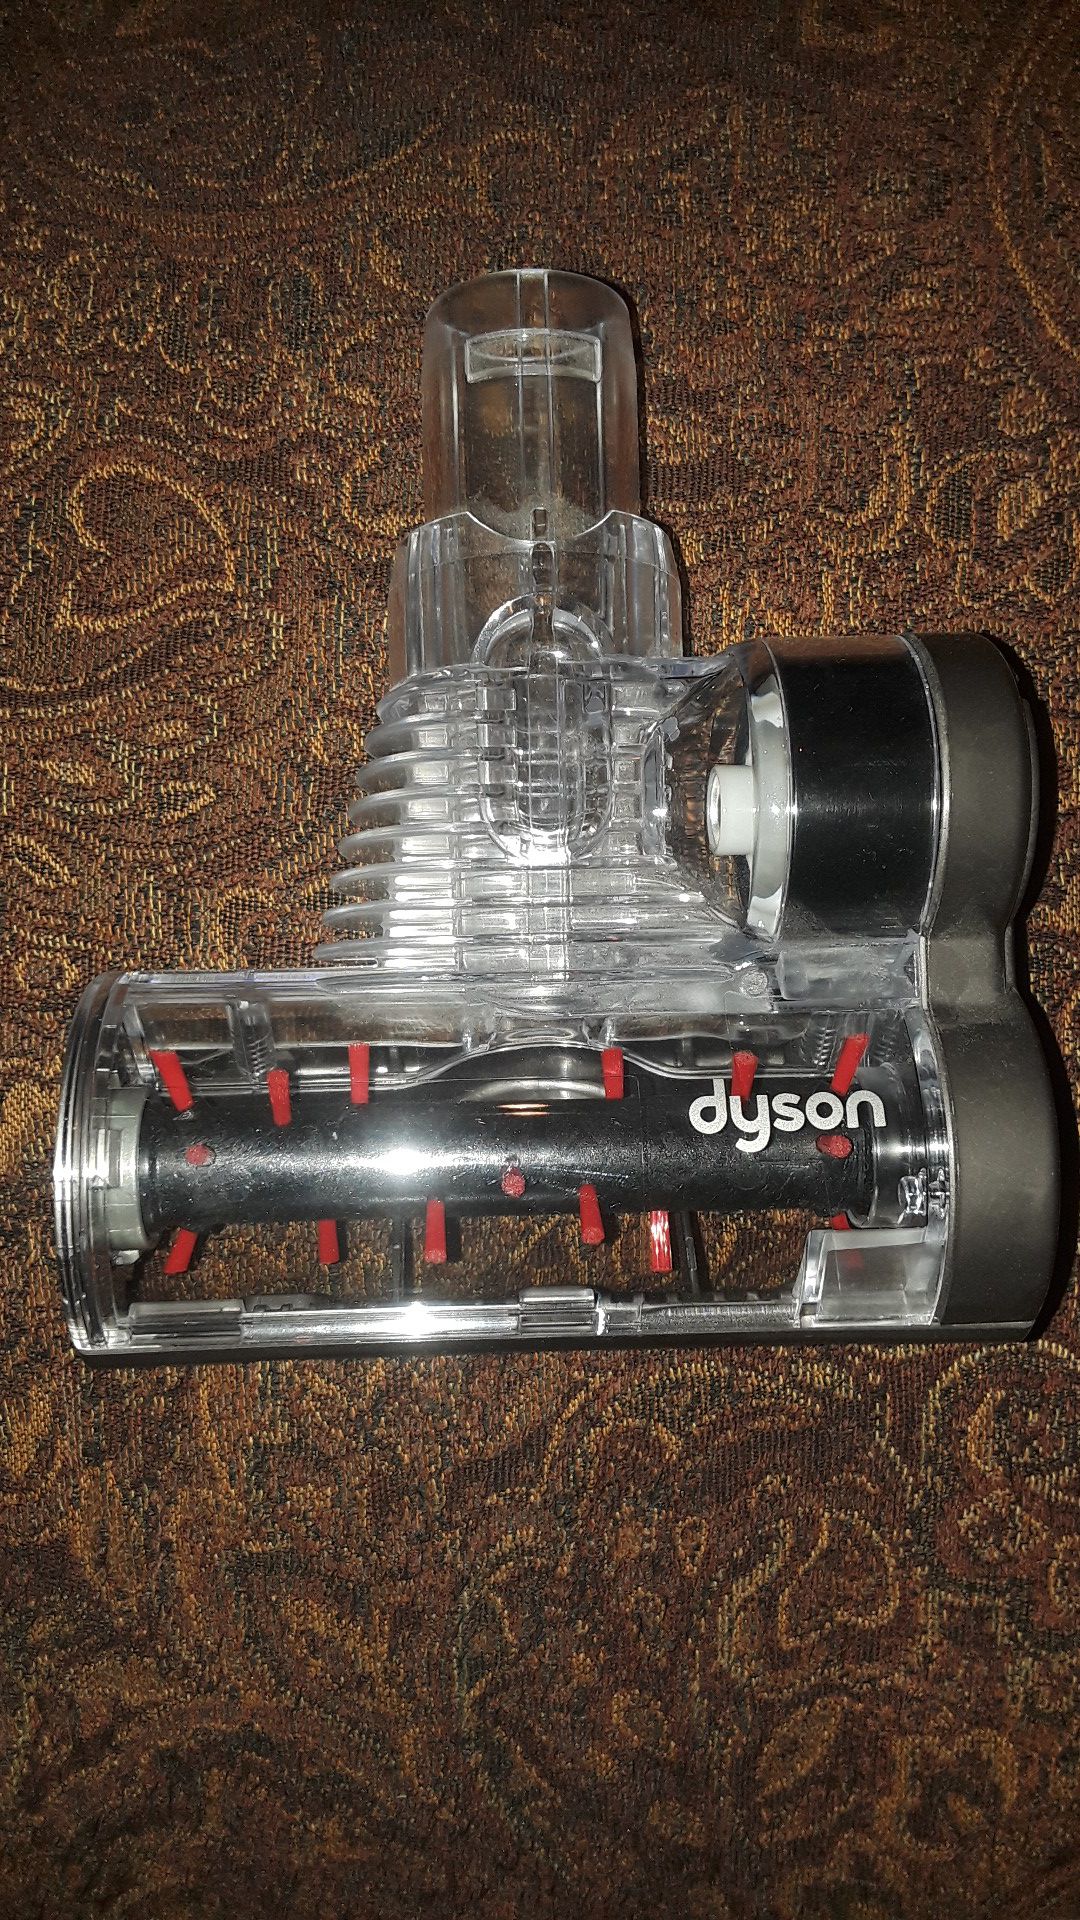 New Dyson Attatchment for upright model DC33